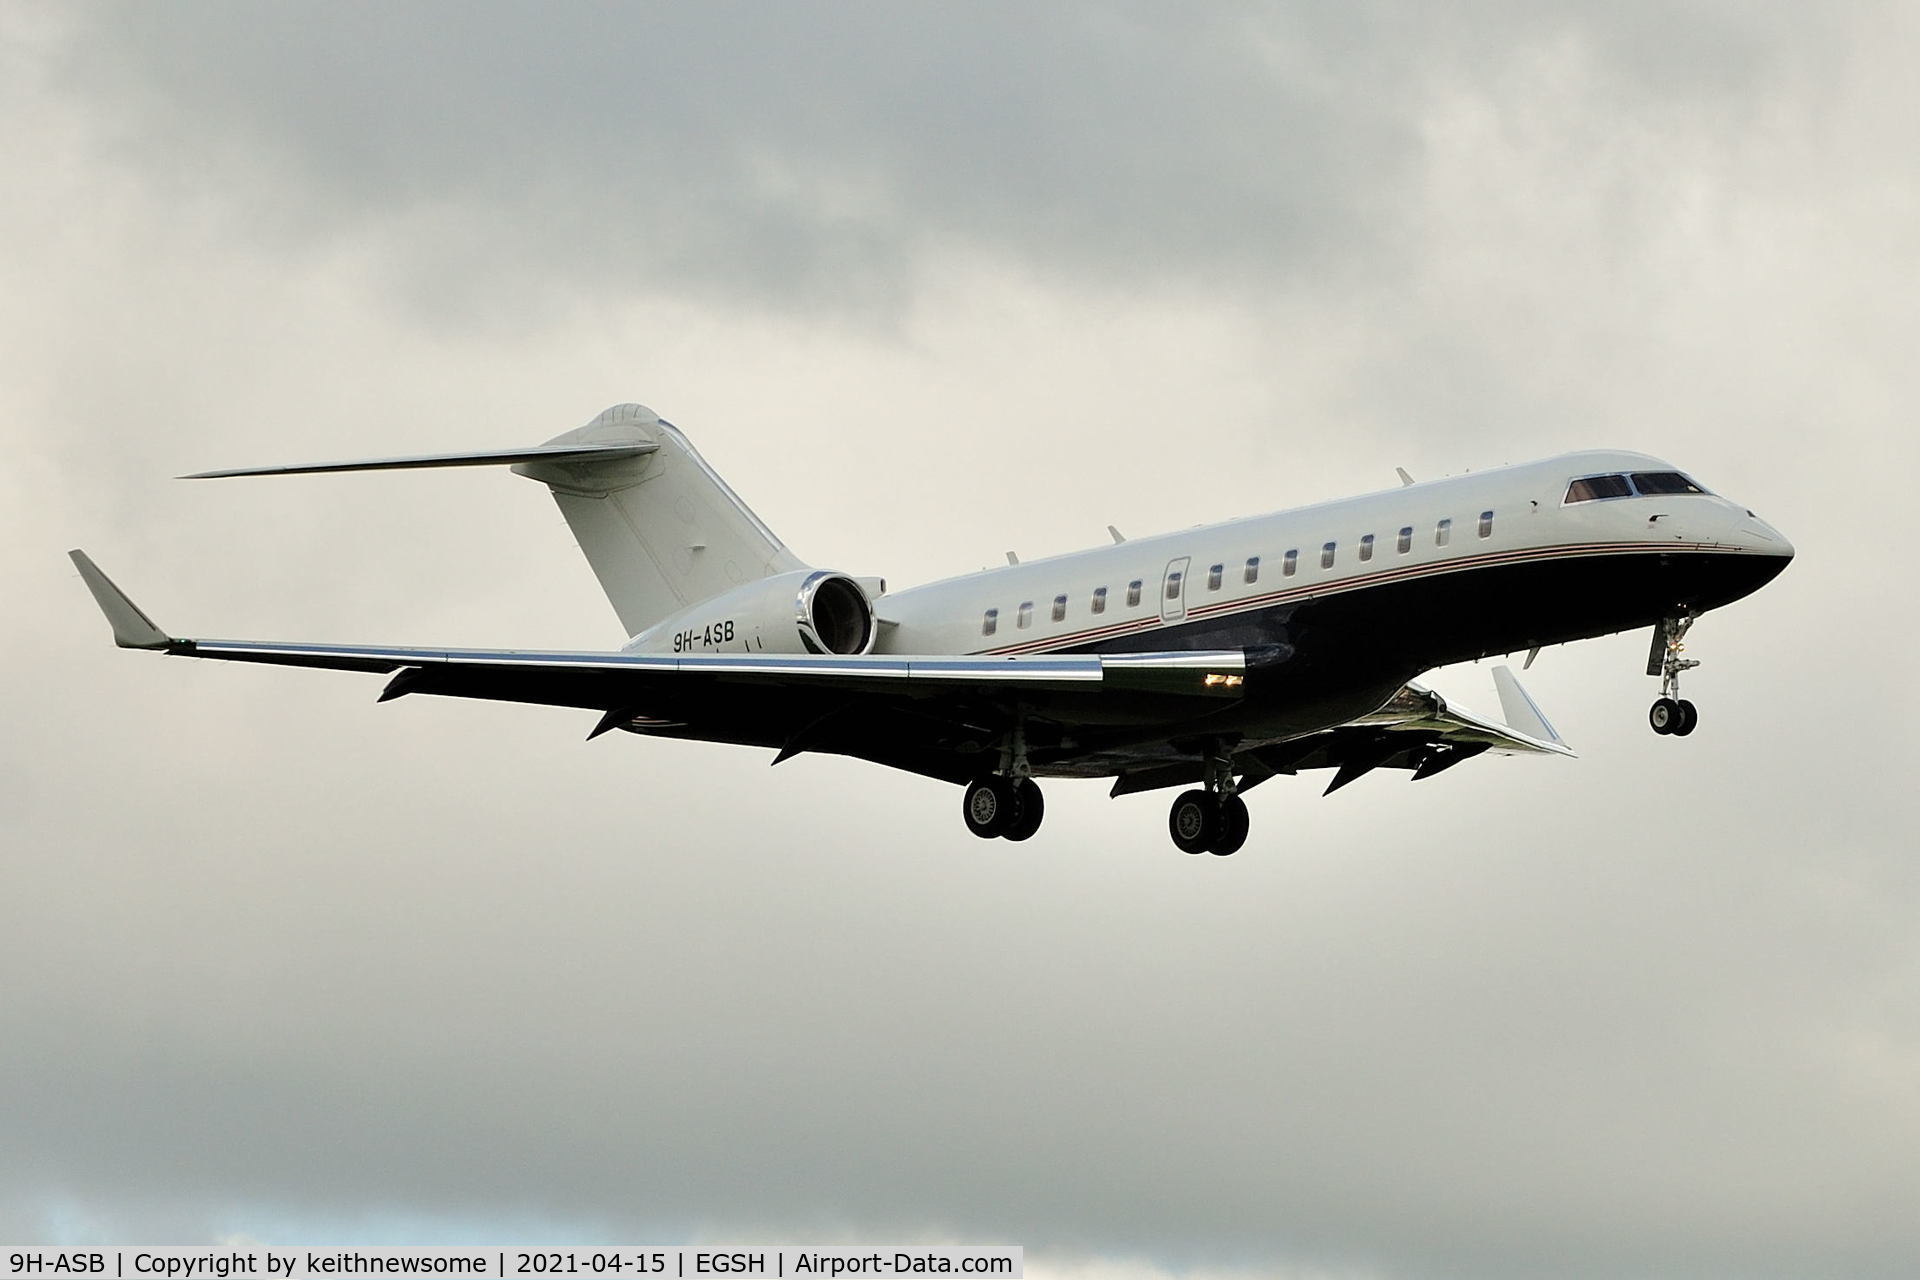 9H-ASB, 2007 Bombardier BD-700-1A11 Global 5000 C/N 9273, Arriving at Norwich.